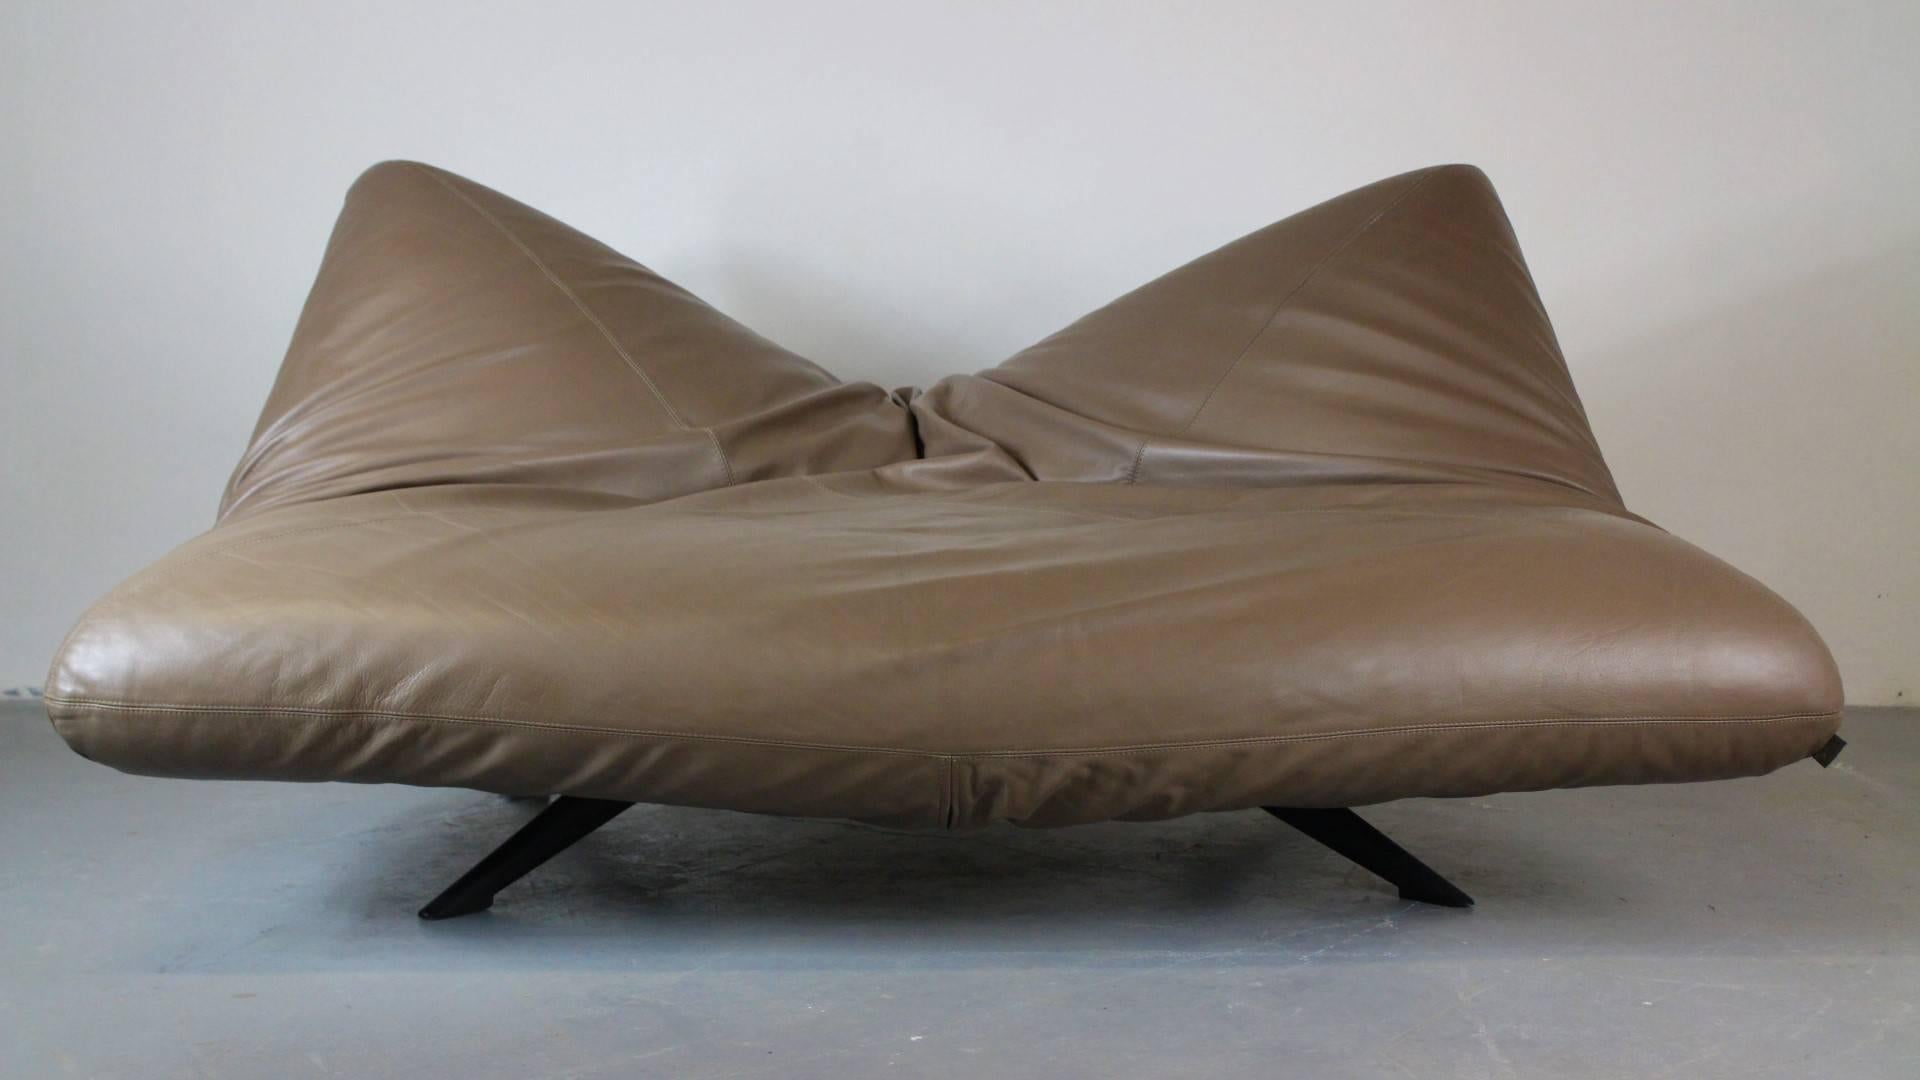 Reclining leather sofa Ribalta from the 1990s, designed by Fabrizio Ballardini and Fulvio Forbicini in 1988, manufactured by Arflex, Italy. Stabile base is made from blackened metal. Excellent original condition.